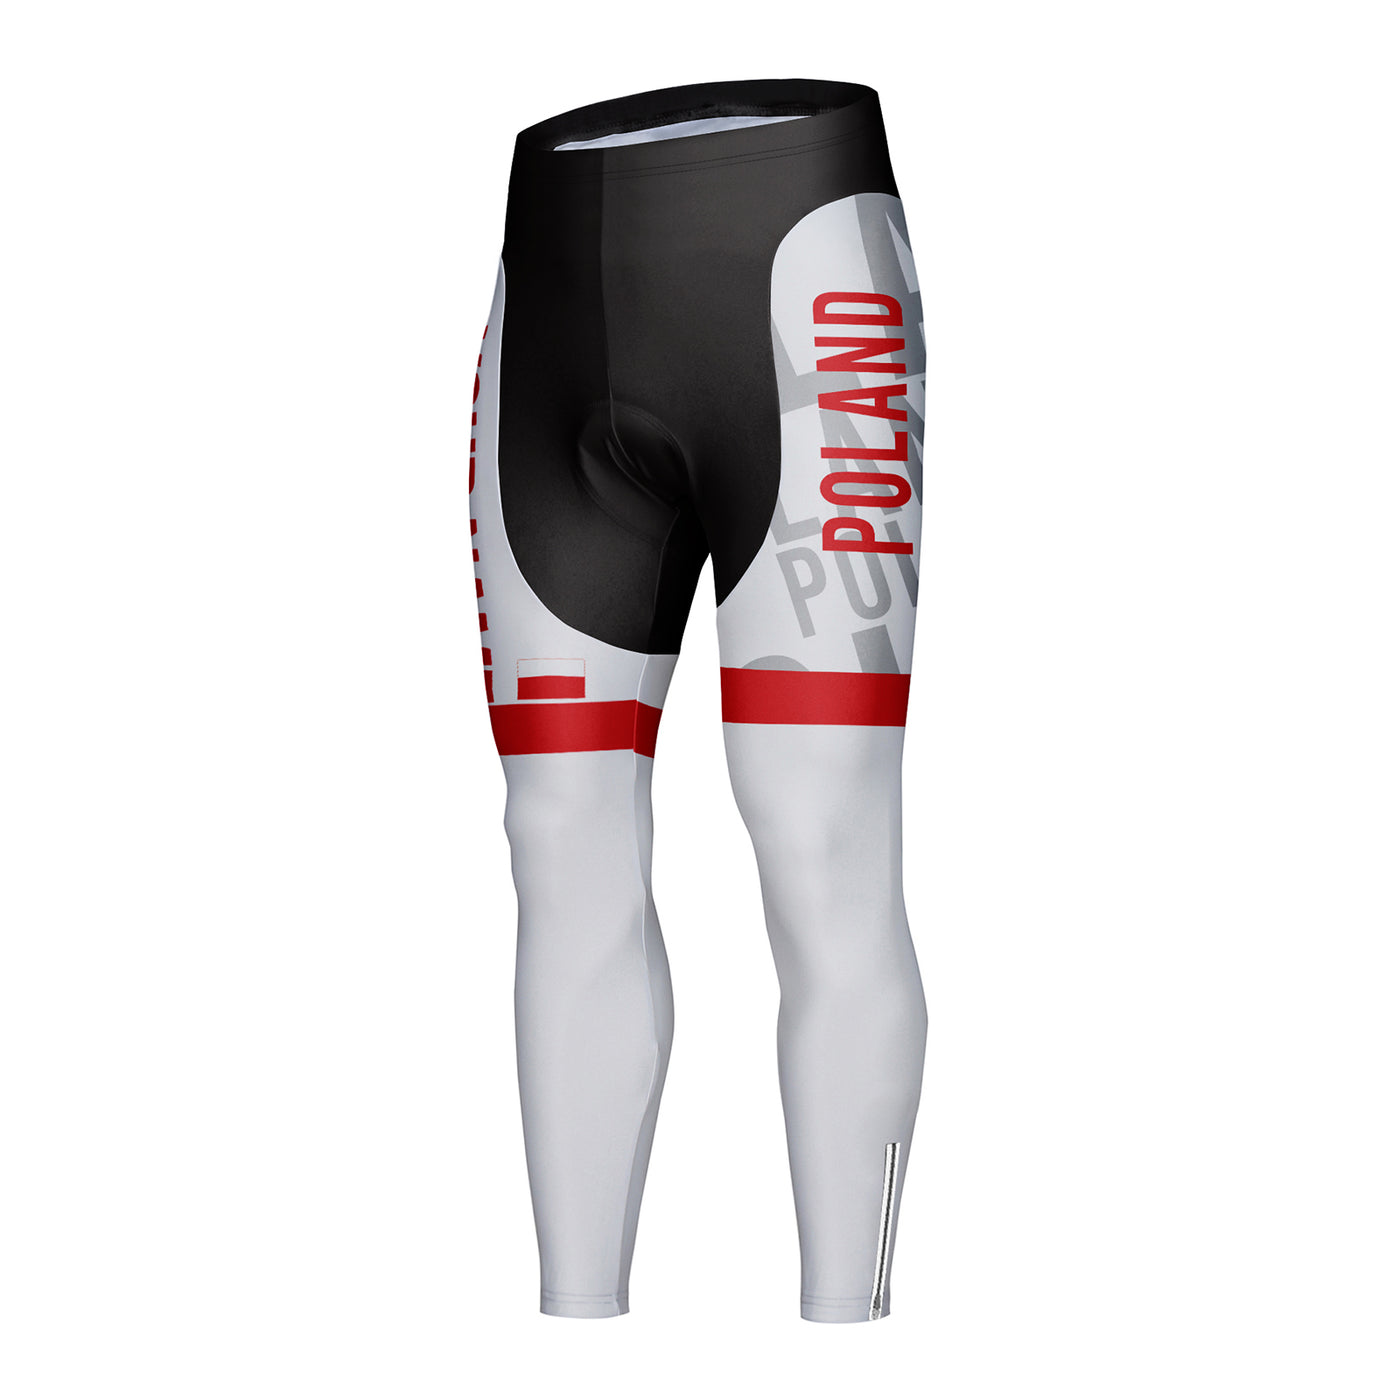 Customized Poland Unisex Cycling Tights Long Pants